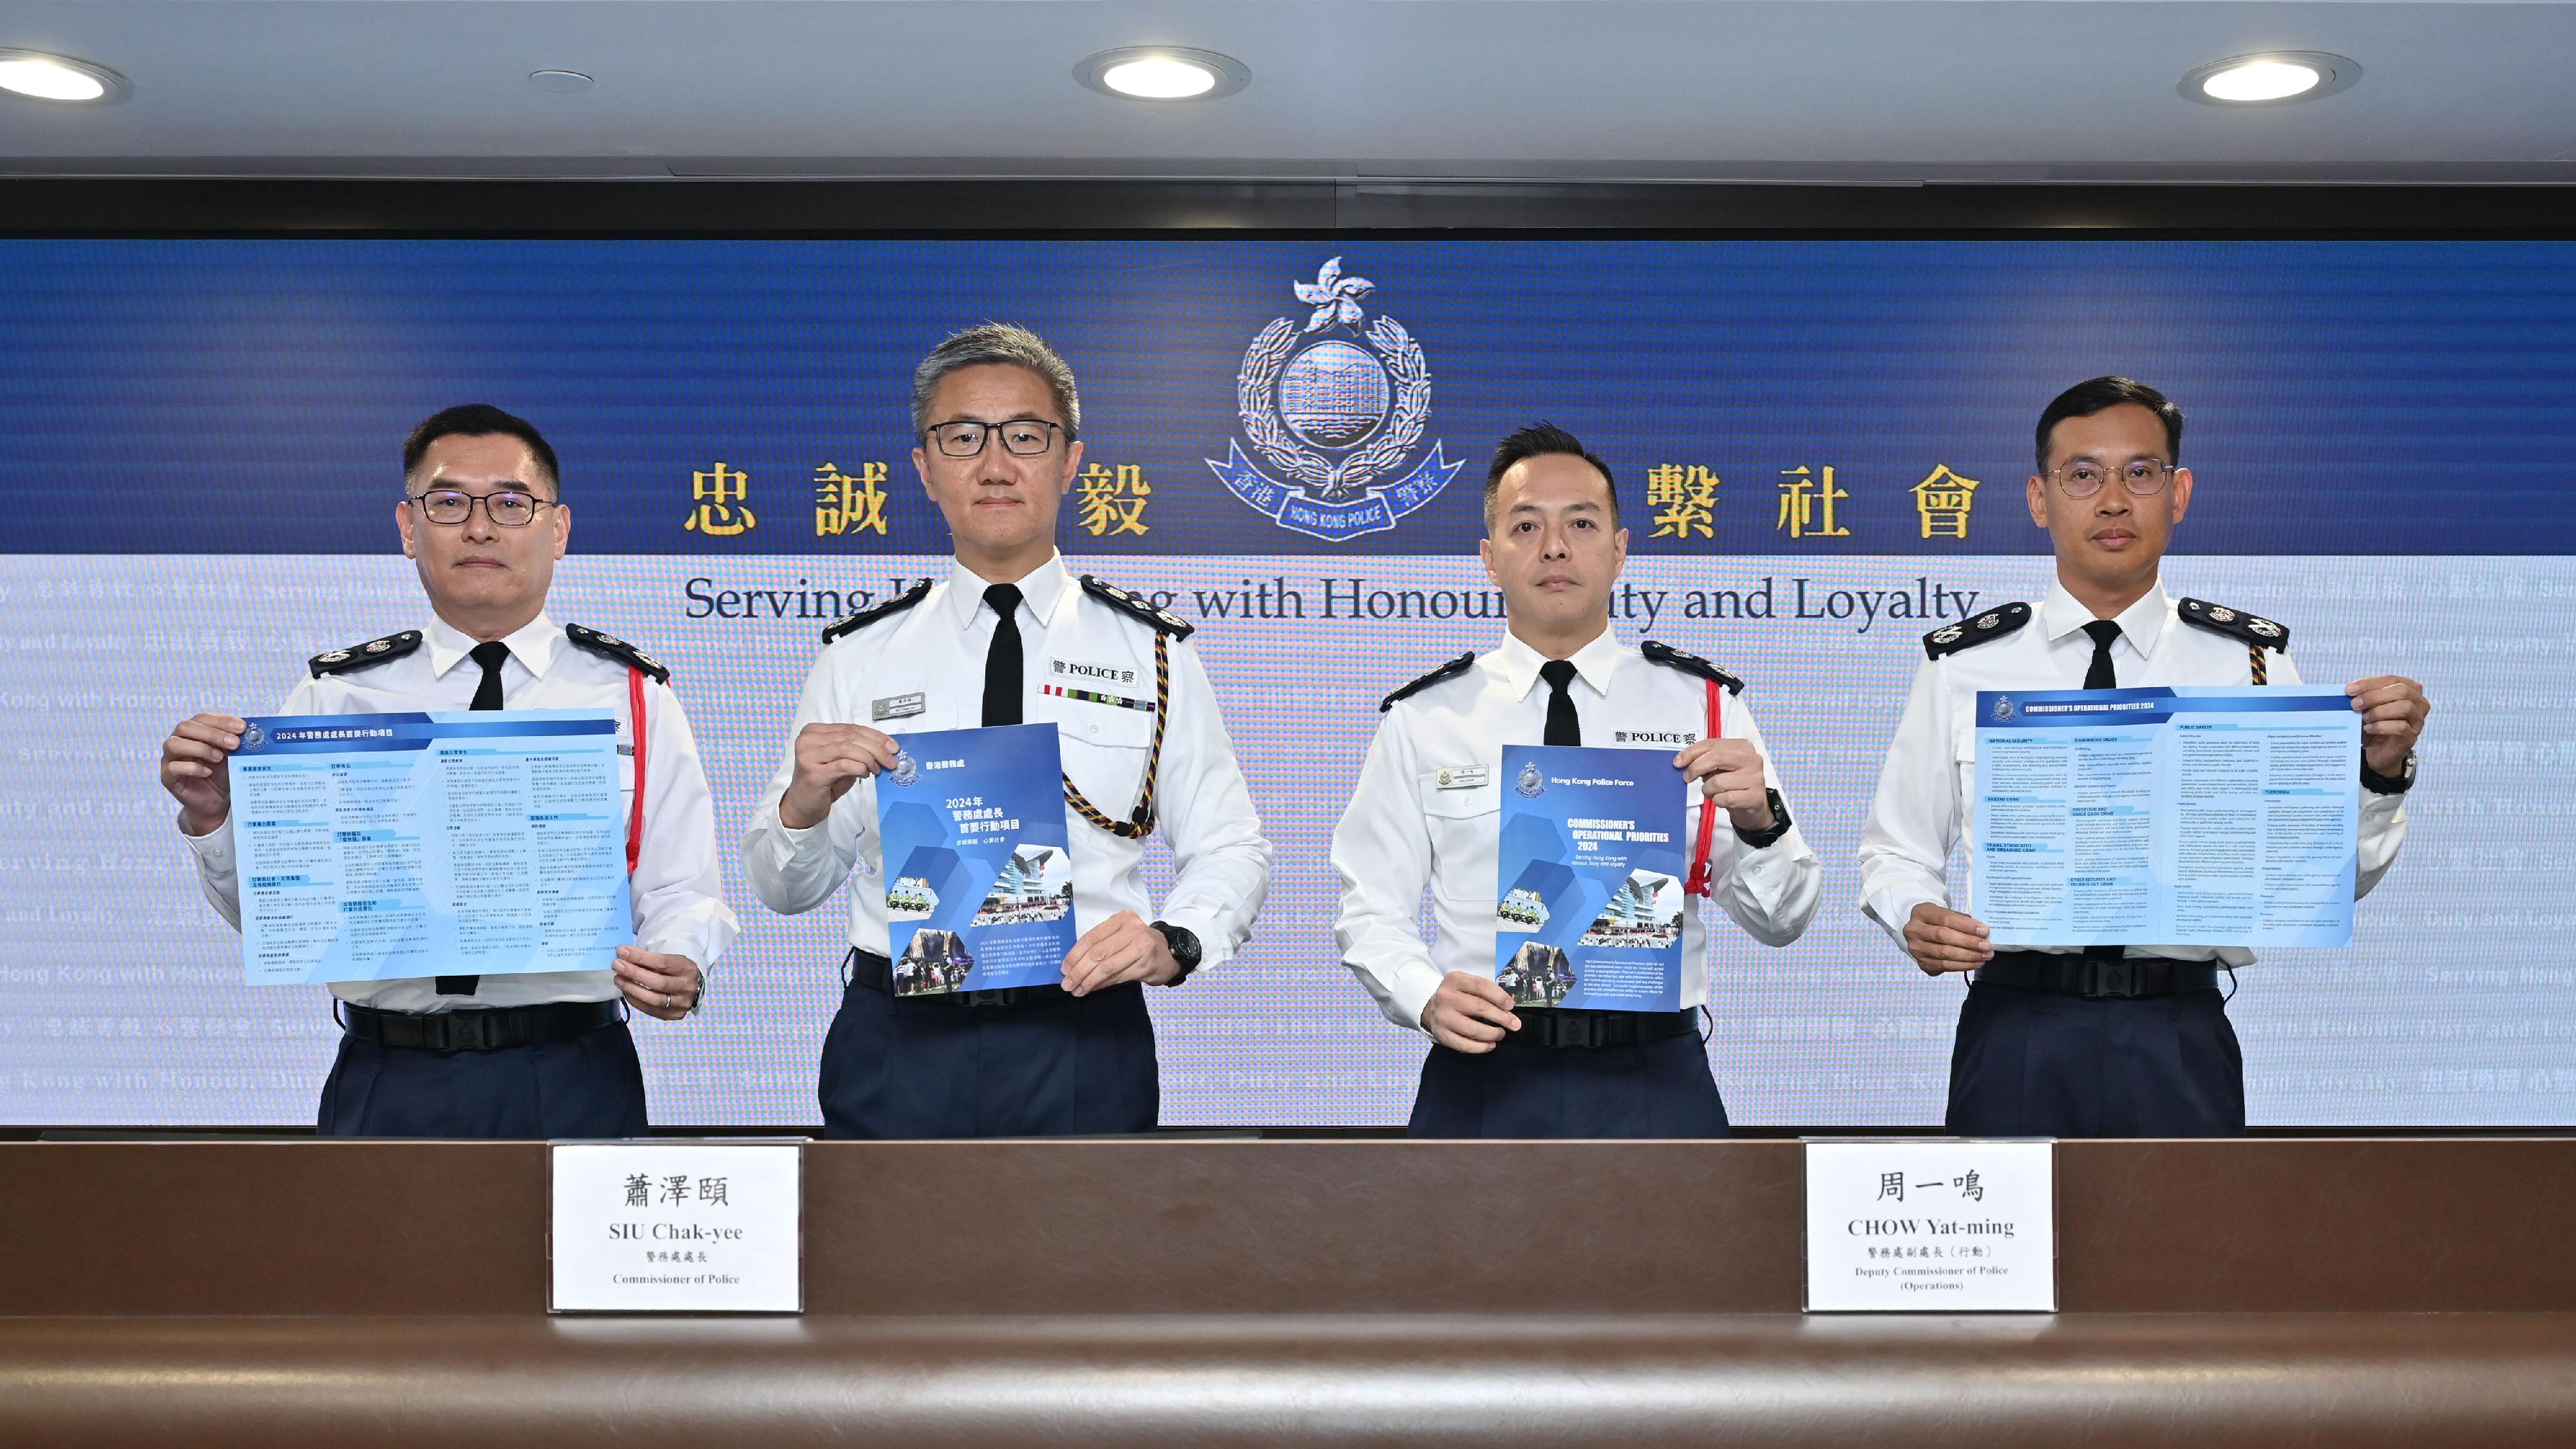 The Commissioner of Police, Mr Siu Chak-yee (second left), reviewed the law and order situation of Hong Kong and the work of the Police in 2023 at a press conference today (February 6). Also present at the press conference were, the Deputy Commissioner of Police (Operations), Mr Chow Yat-ming (second right); the Deputy Commissioner of Police (National Security), Mr Kan Kai-yan, (first left); and the Deputy Commissioner of Police (Management), Mr Chan Joon-sun (first right).